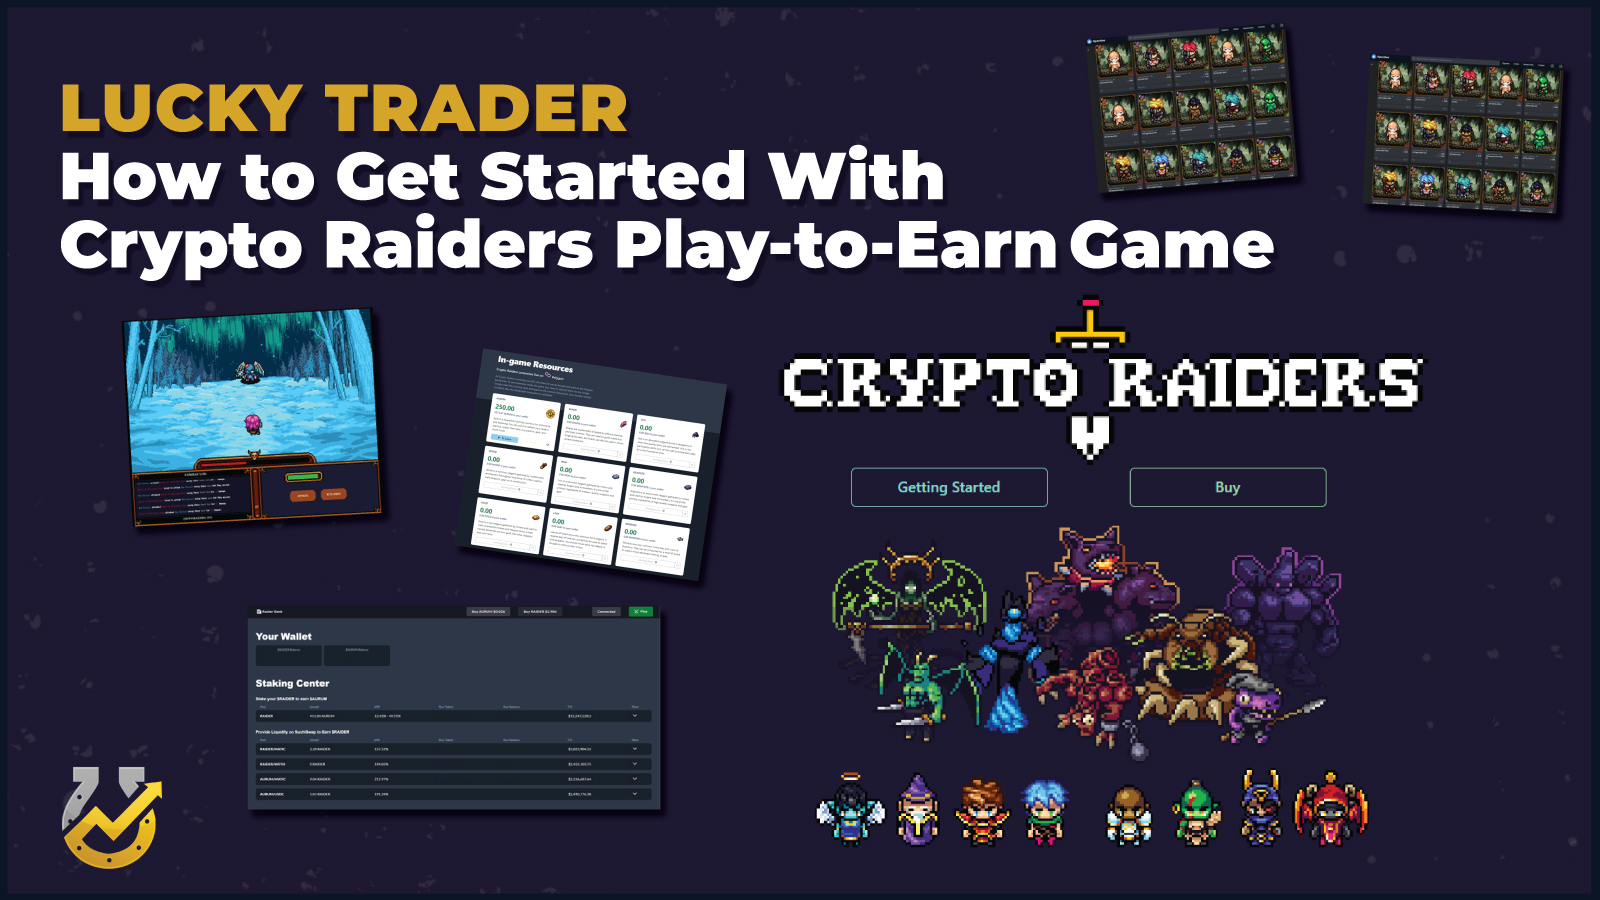 Get Started With Crypto Raiders Play-to-Earn Game